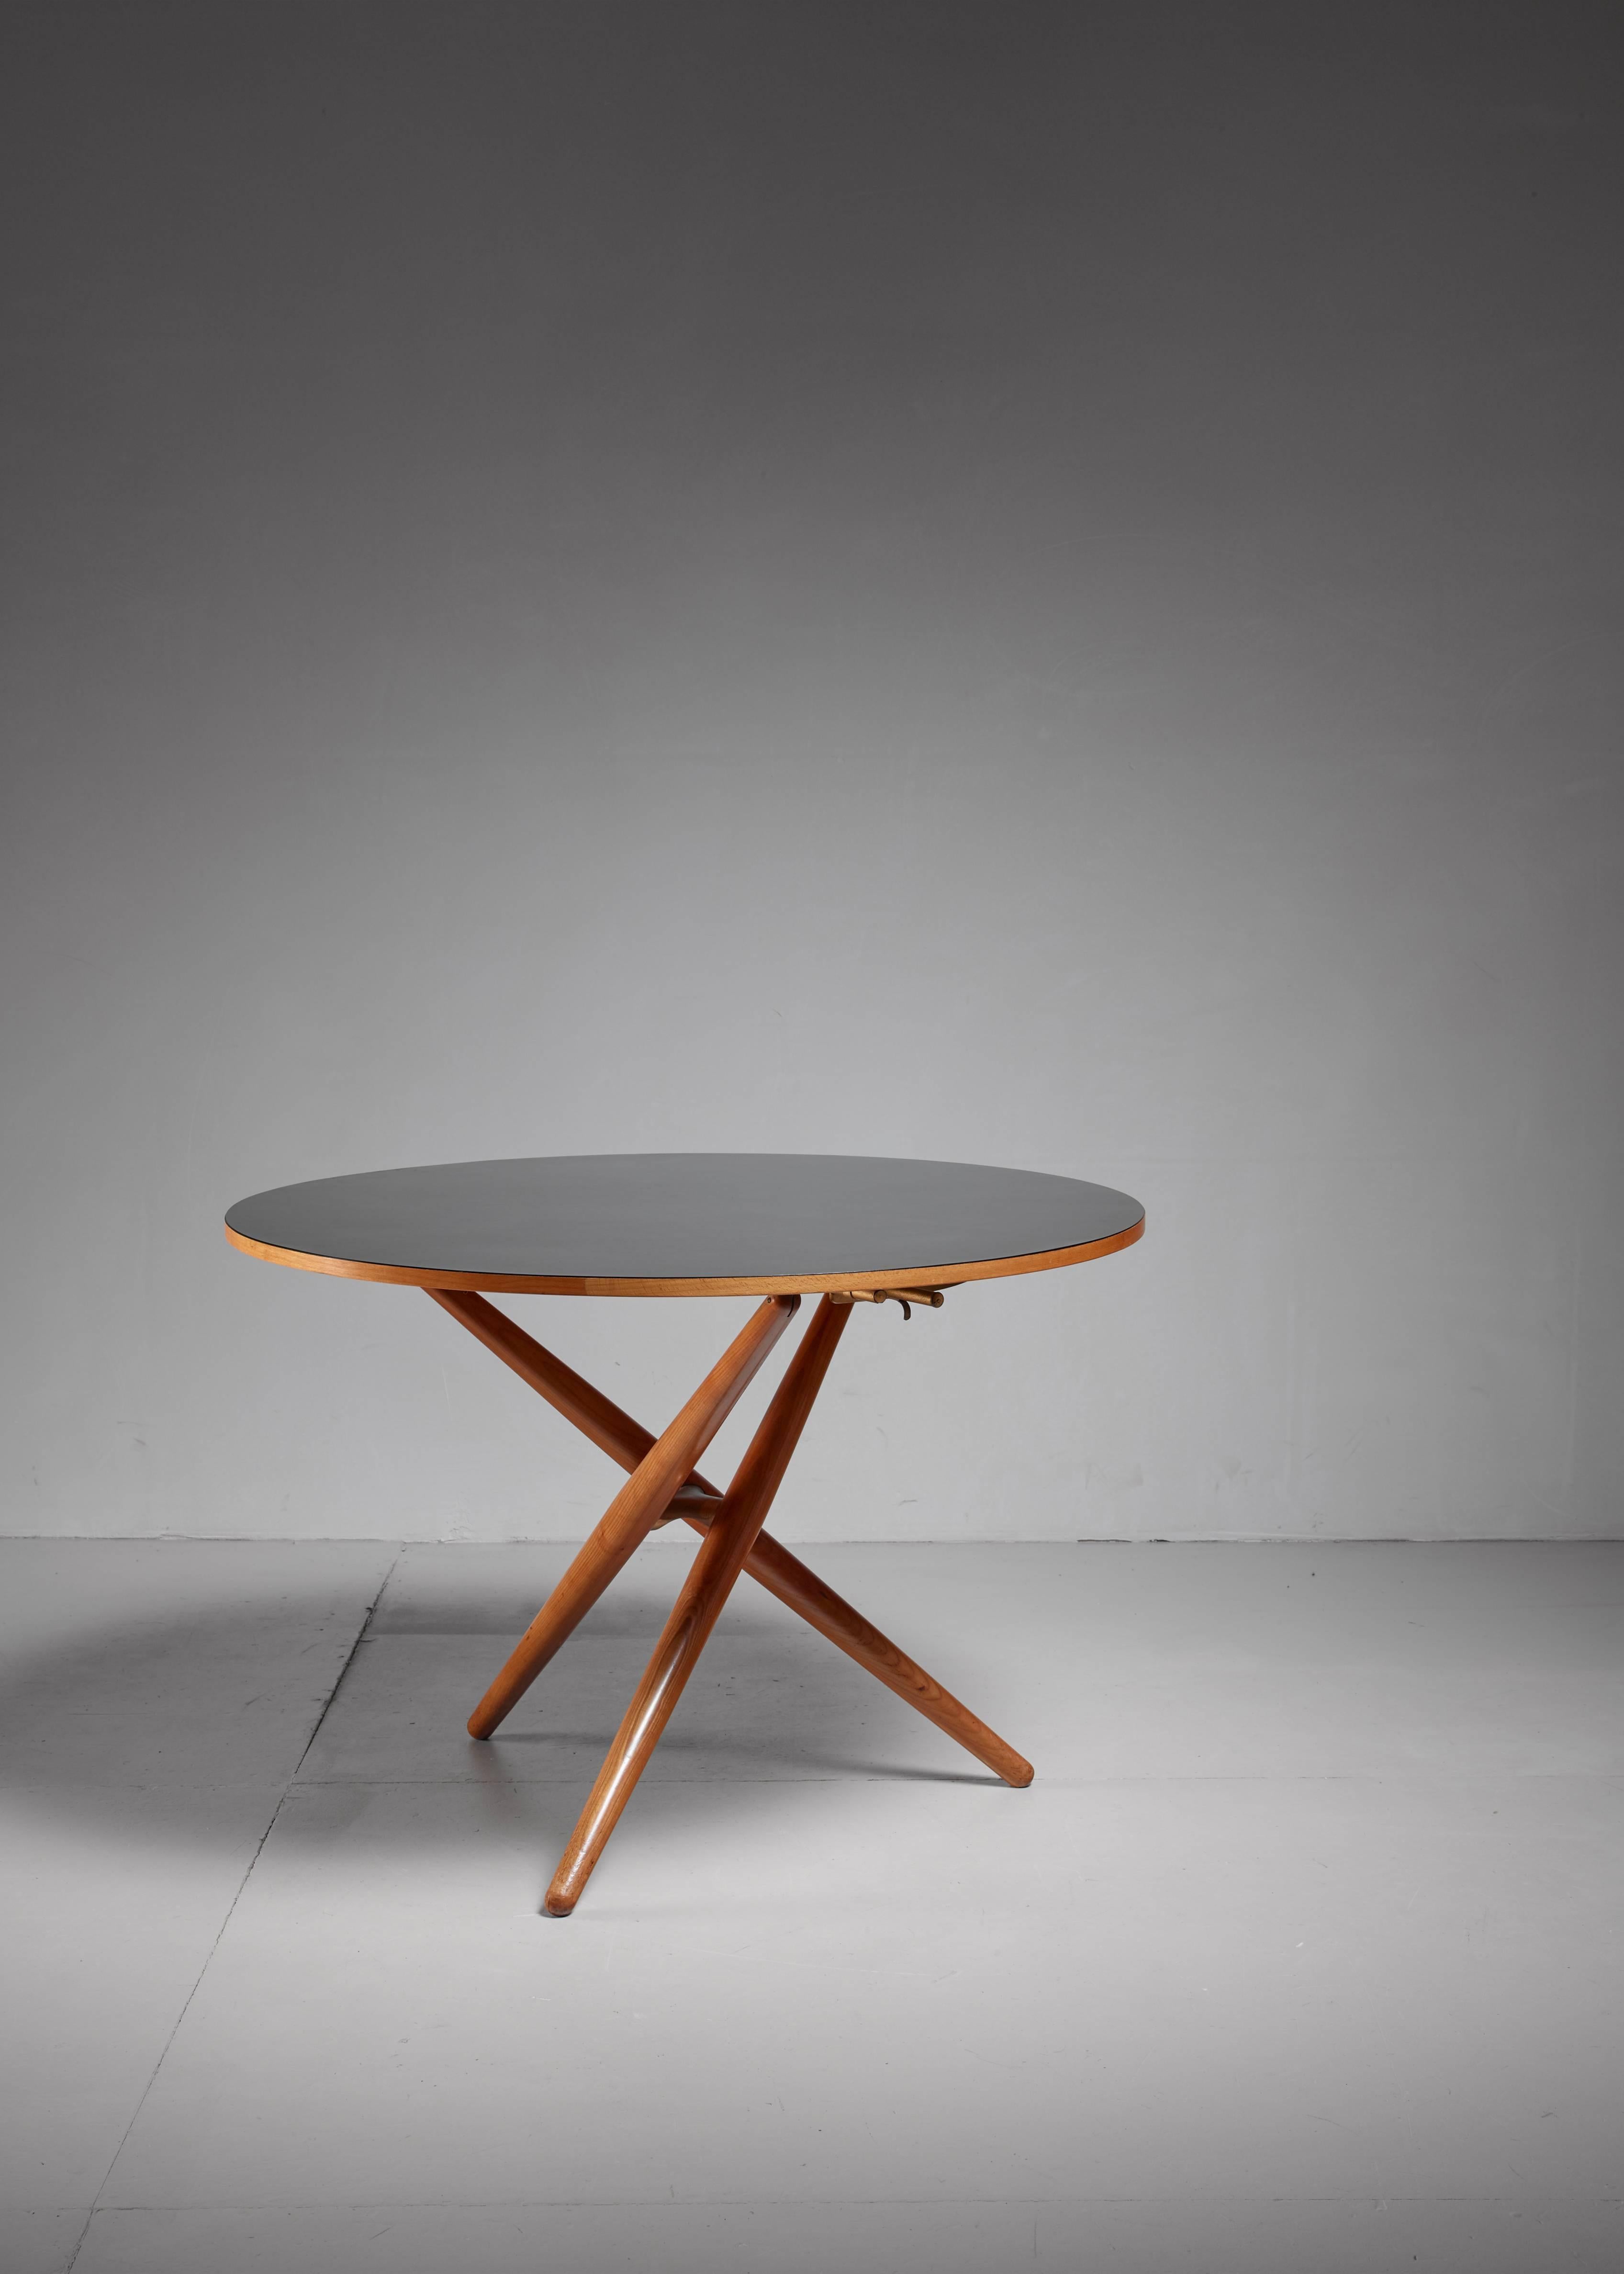 An early edition height-adjustable oak table, designed by Jürg Bally for Wohnhilfe, Switzerland in 1951. The black formica top rests on three crossed legs. 
* This piece is offered to you by Bloomberry, Amsterdam *

The table has the height